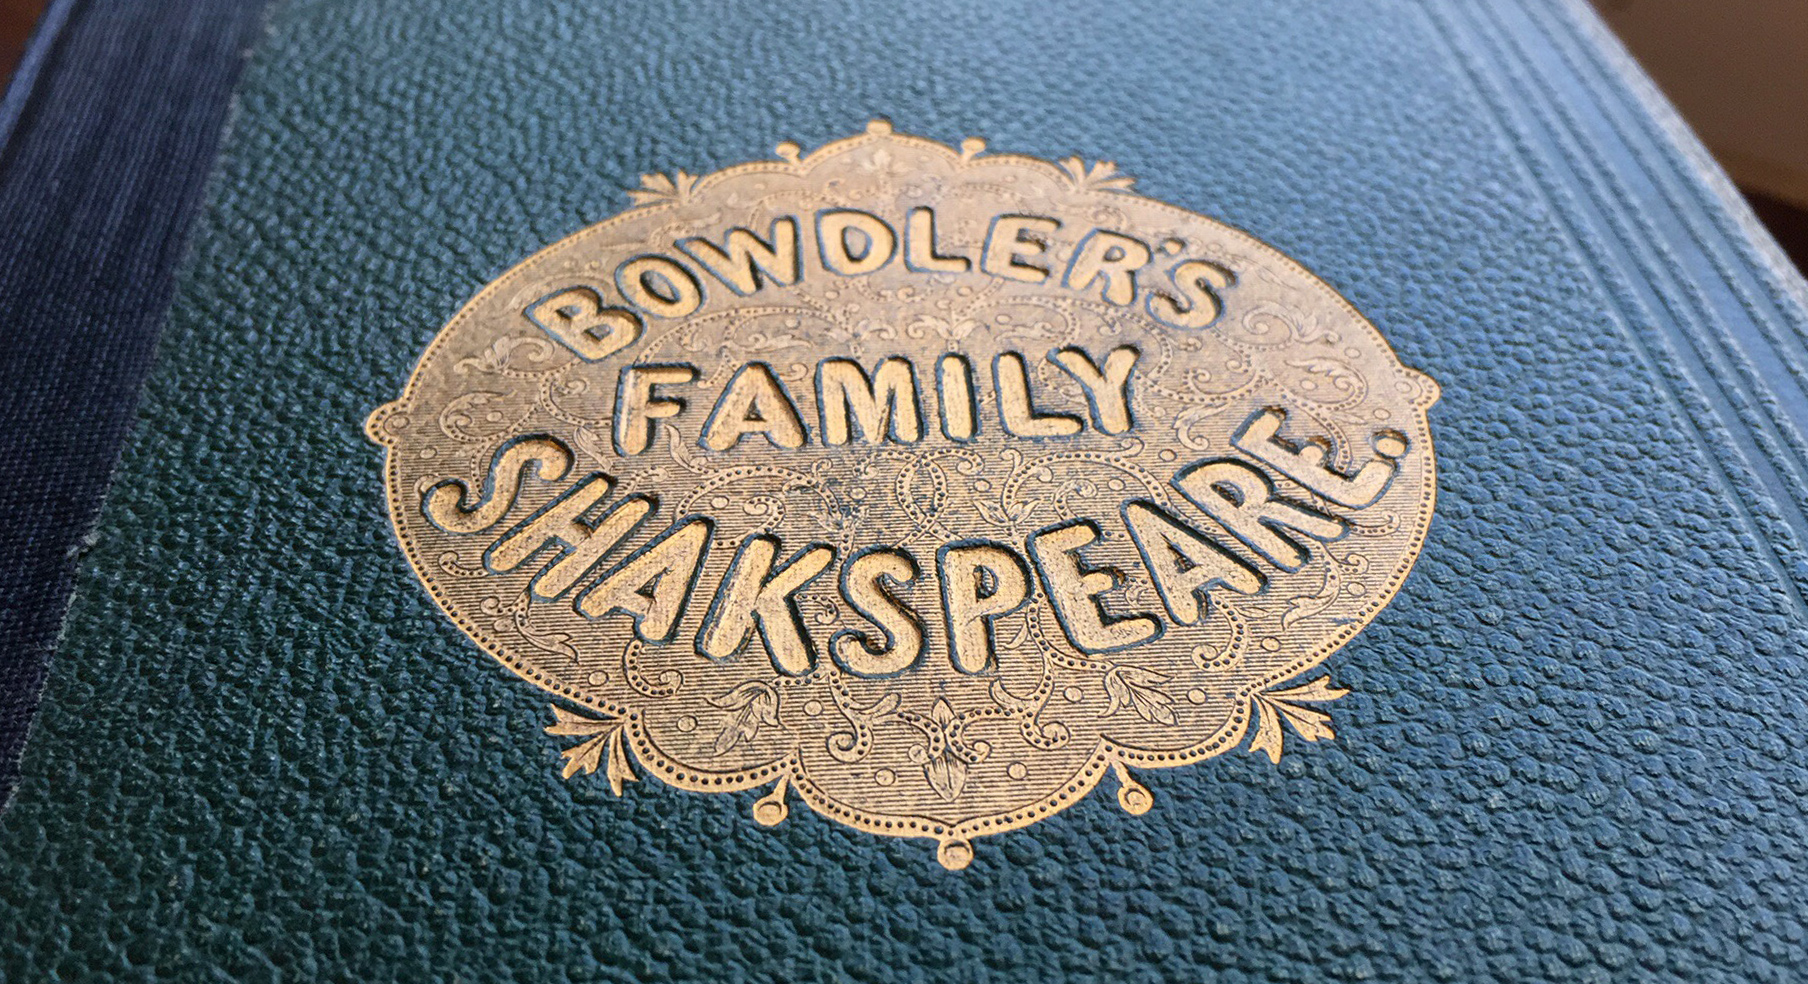 Gold embossed cover title of Thomas Bowdler's Family Shakespeare, 1863 edition